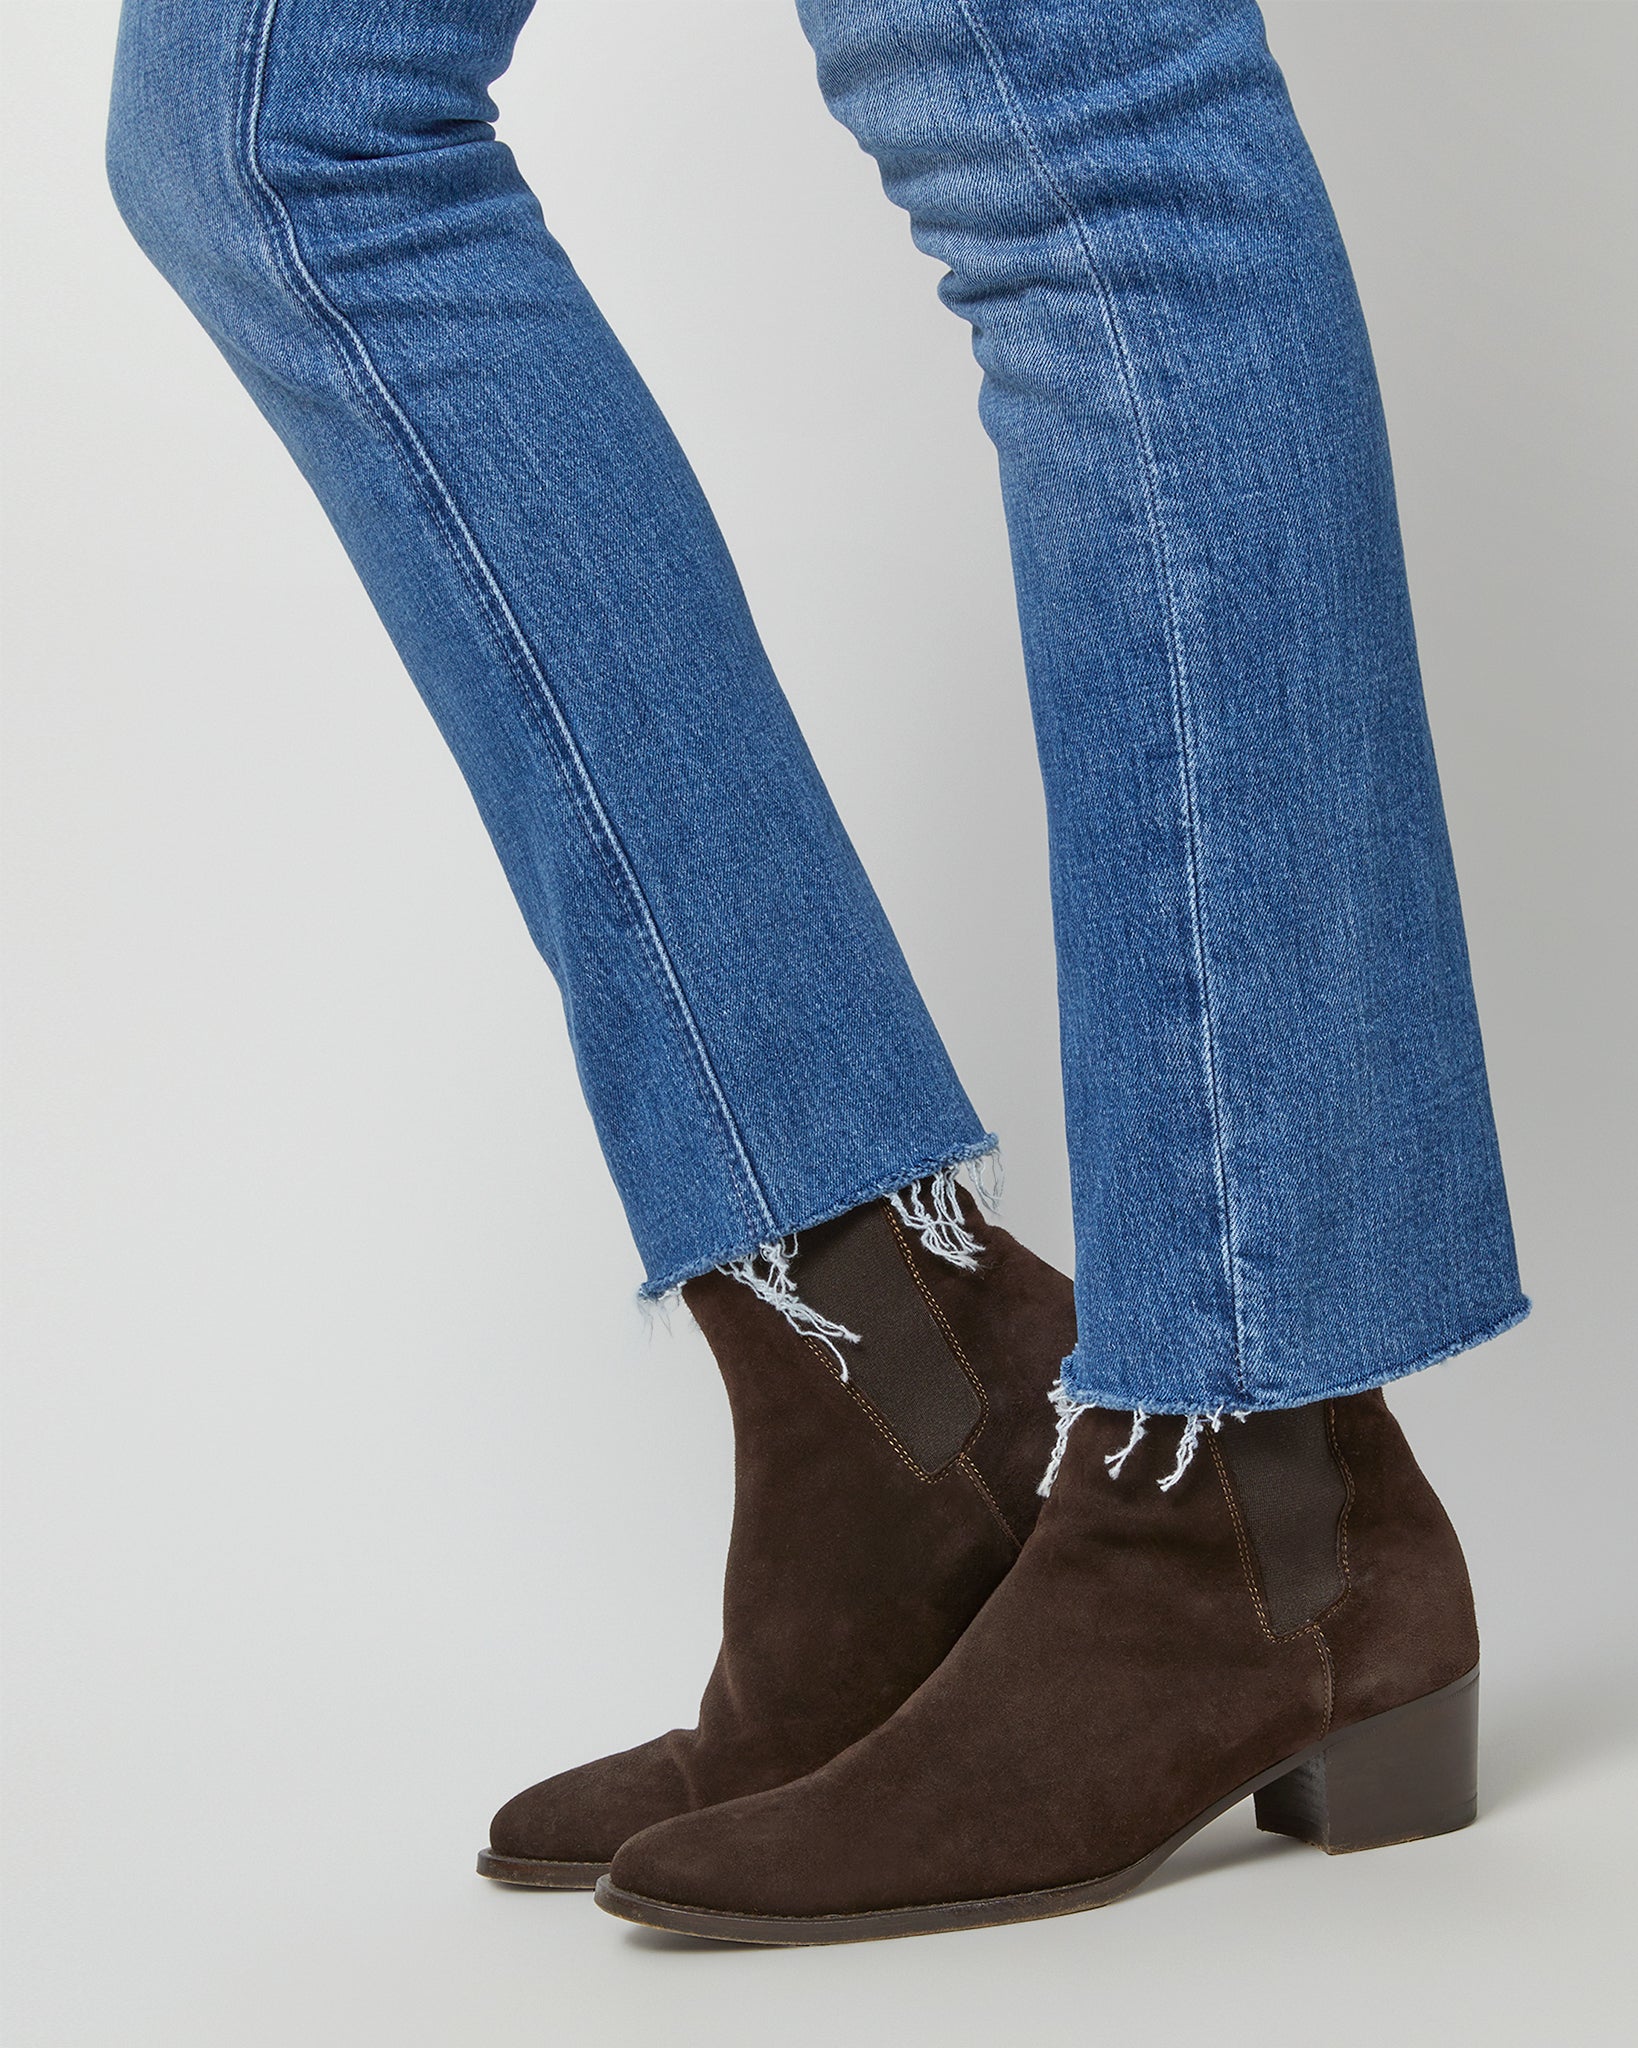 The Mid Rise Dazzler Ankle Fray Jean in New Sheriff In Town